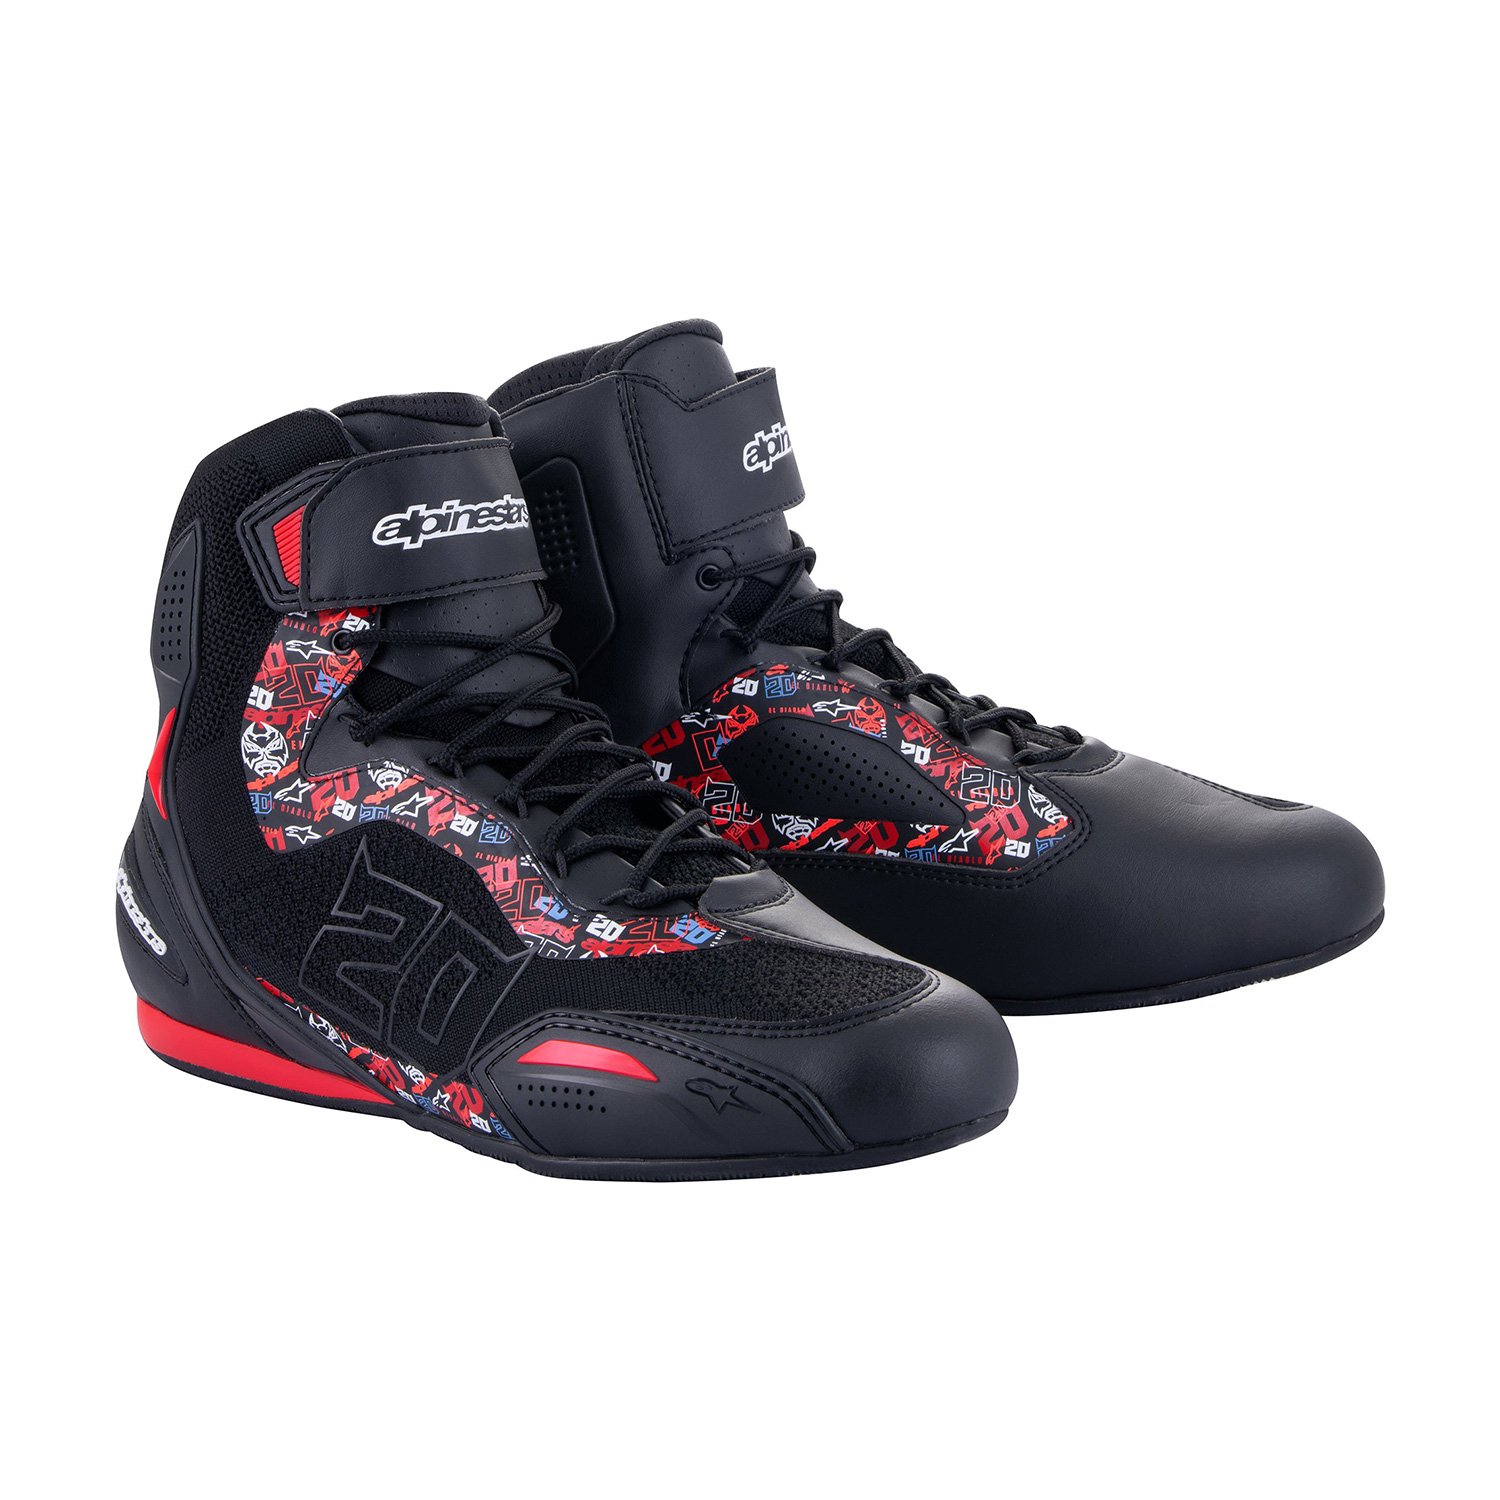 Image of Alpinestars FQ20 Faster-3 Rideknit Noir Bright Rouge Chaussures Taille US 9